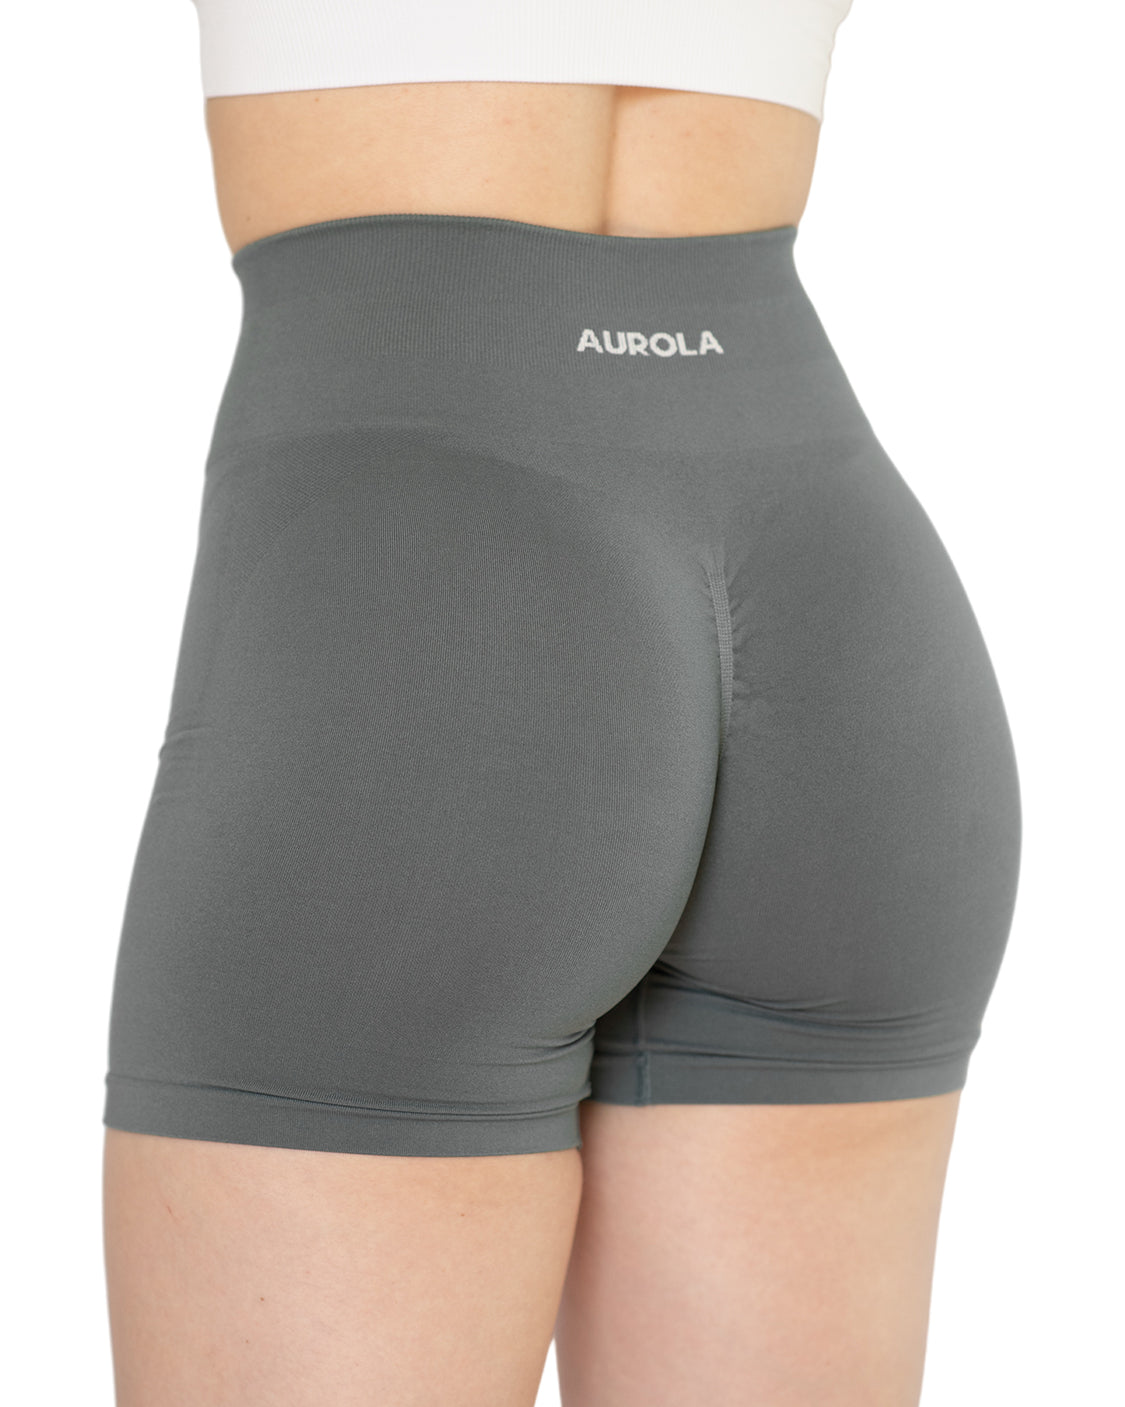 AUROLA Intensify Workout Shorts for Women Seamless Scrunch Short Gym Yoga  Running Sport Active Exercise Fitness Shorts in Saudi Arabia